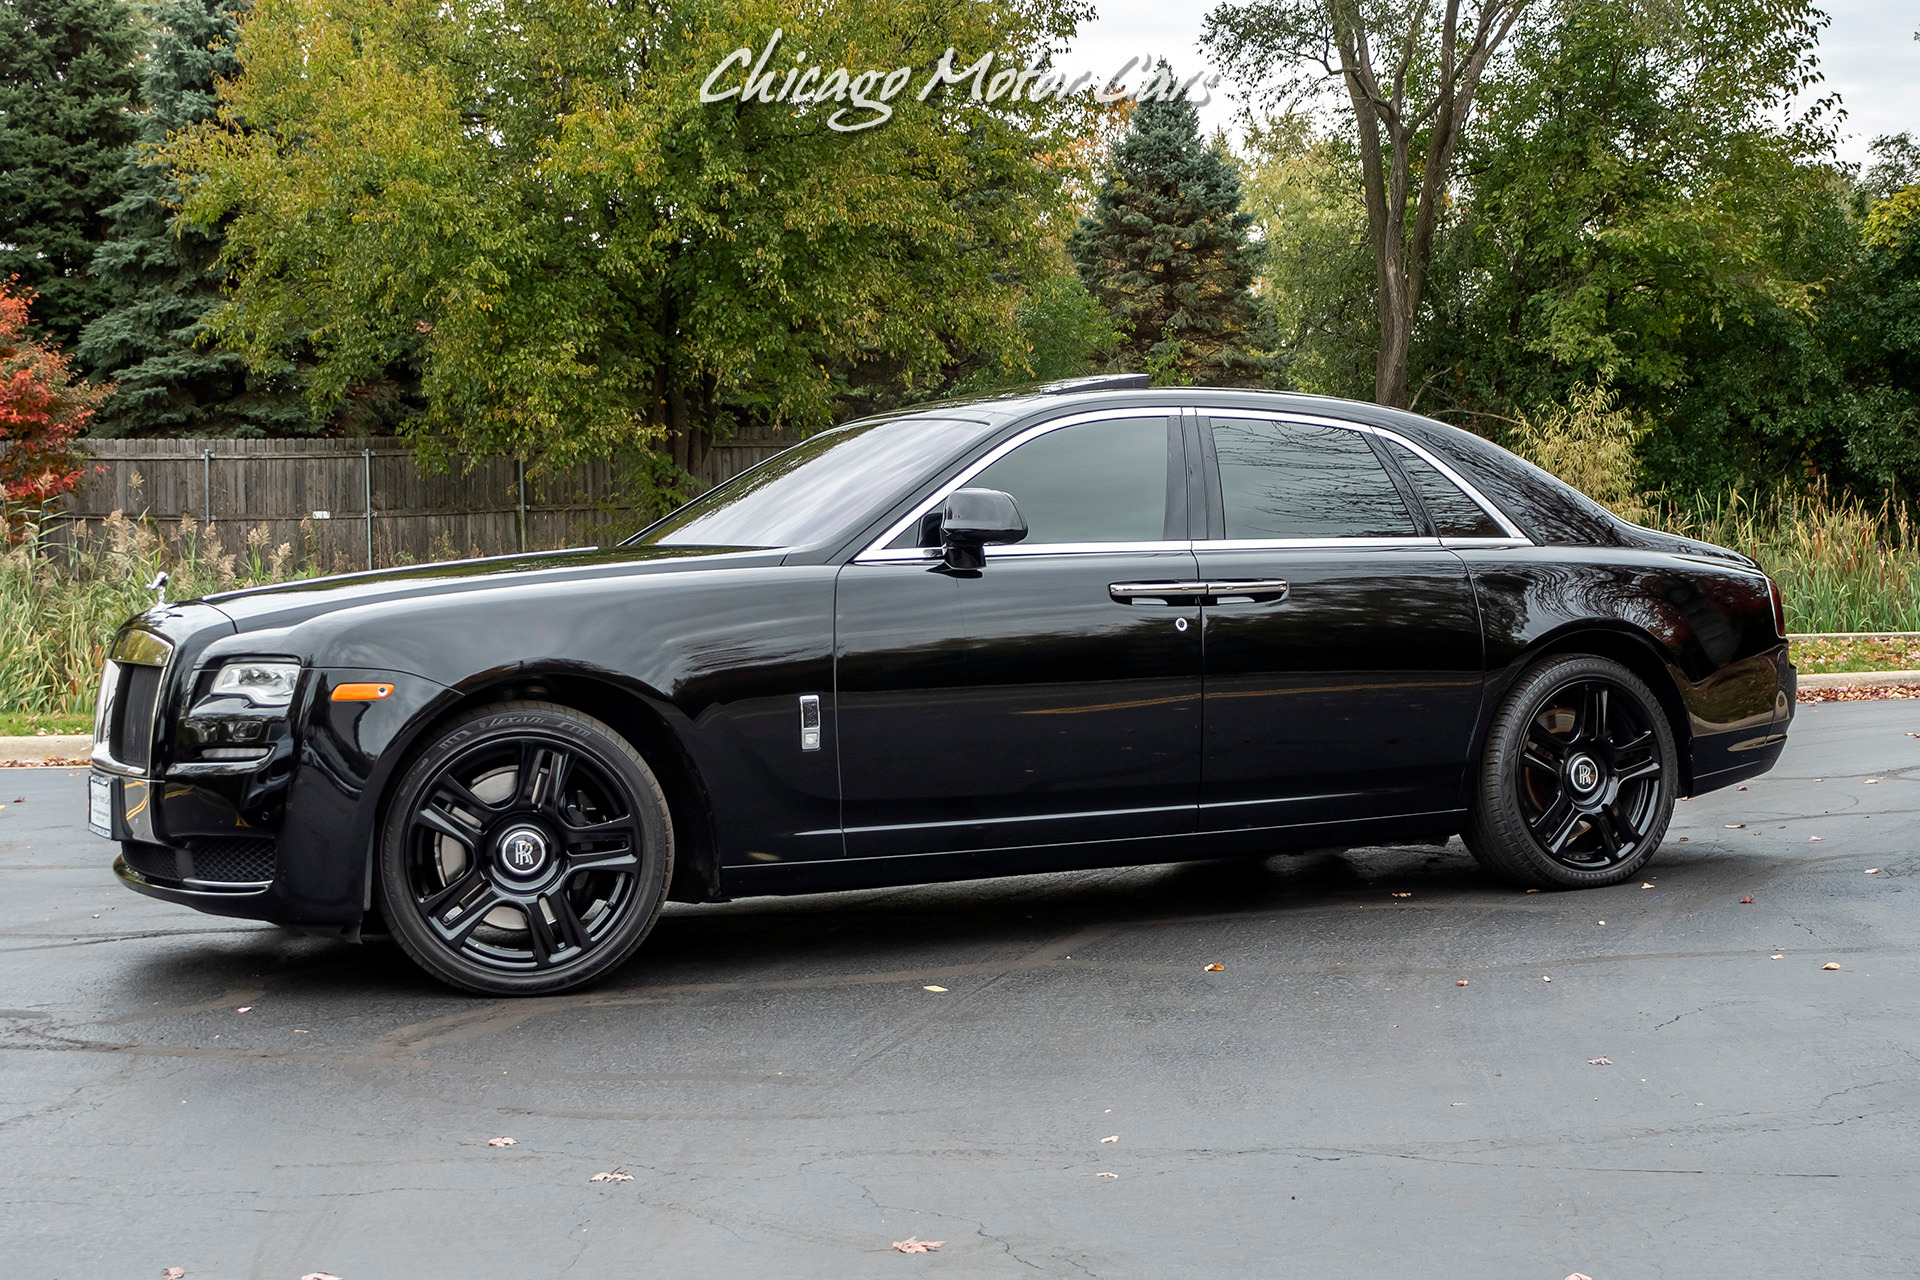 Used 2015 RollsRoyce Ghost Sedan ALL BLACKED OUT Serviced LOADED For Sale  Special Pricing  Chicago Motor Cars Stock 16487A